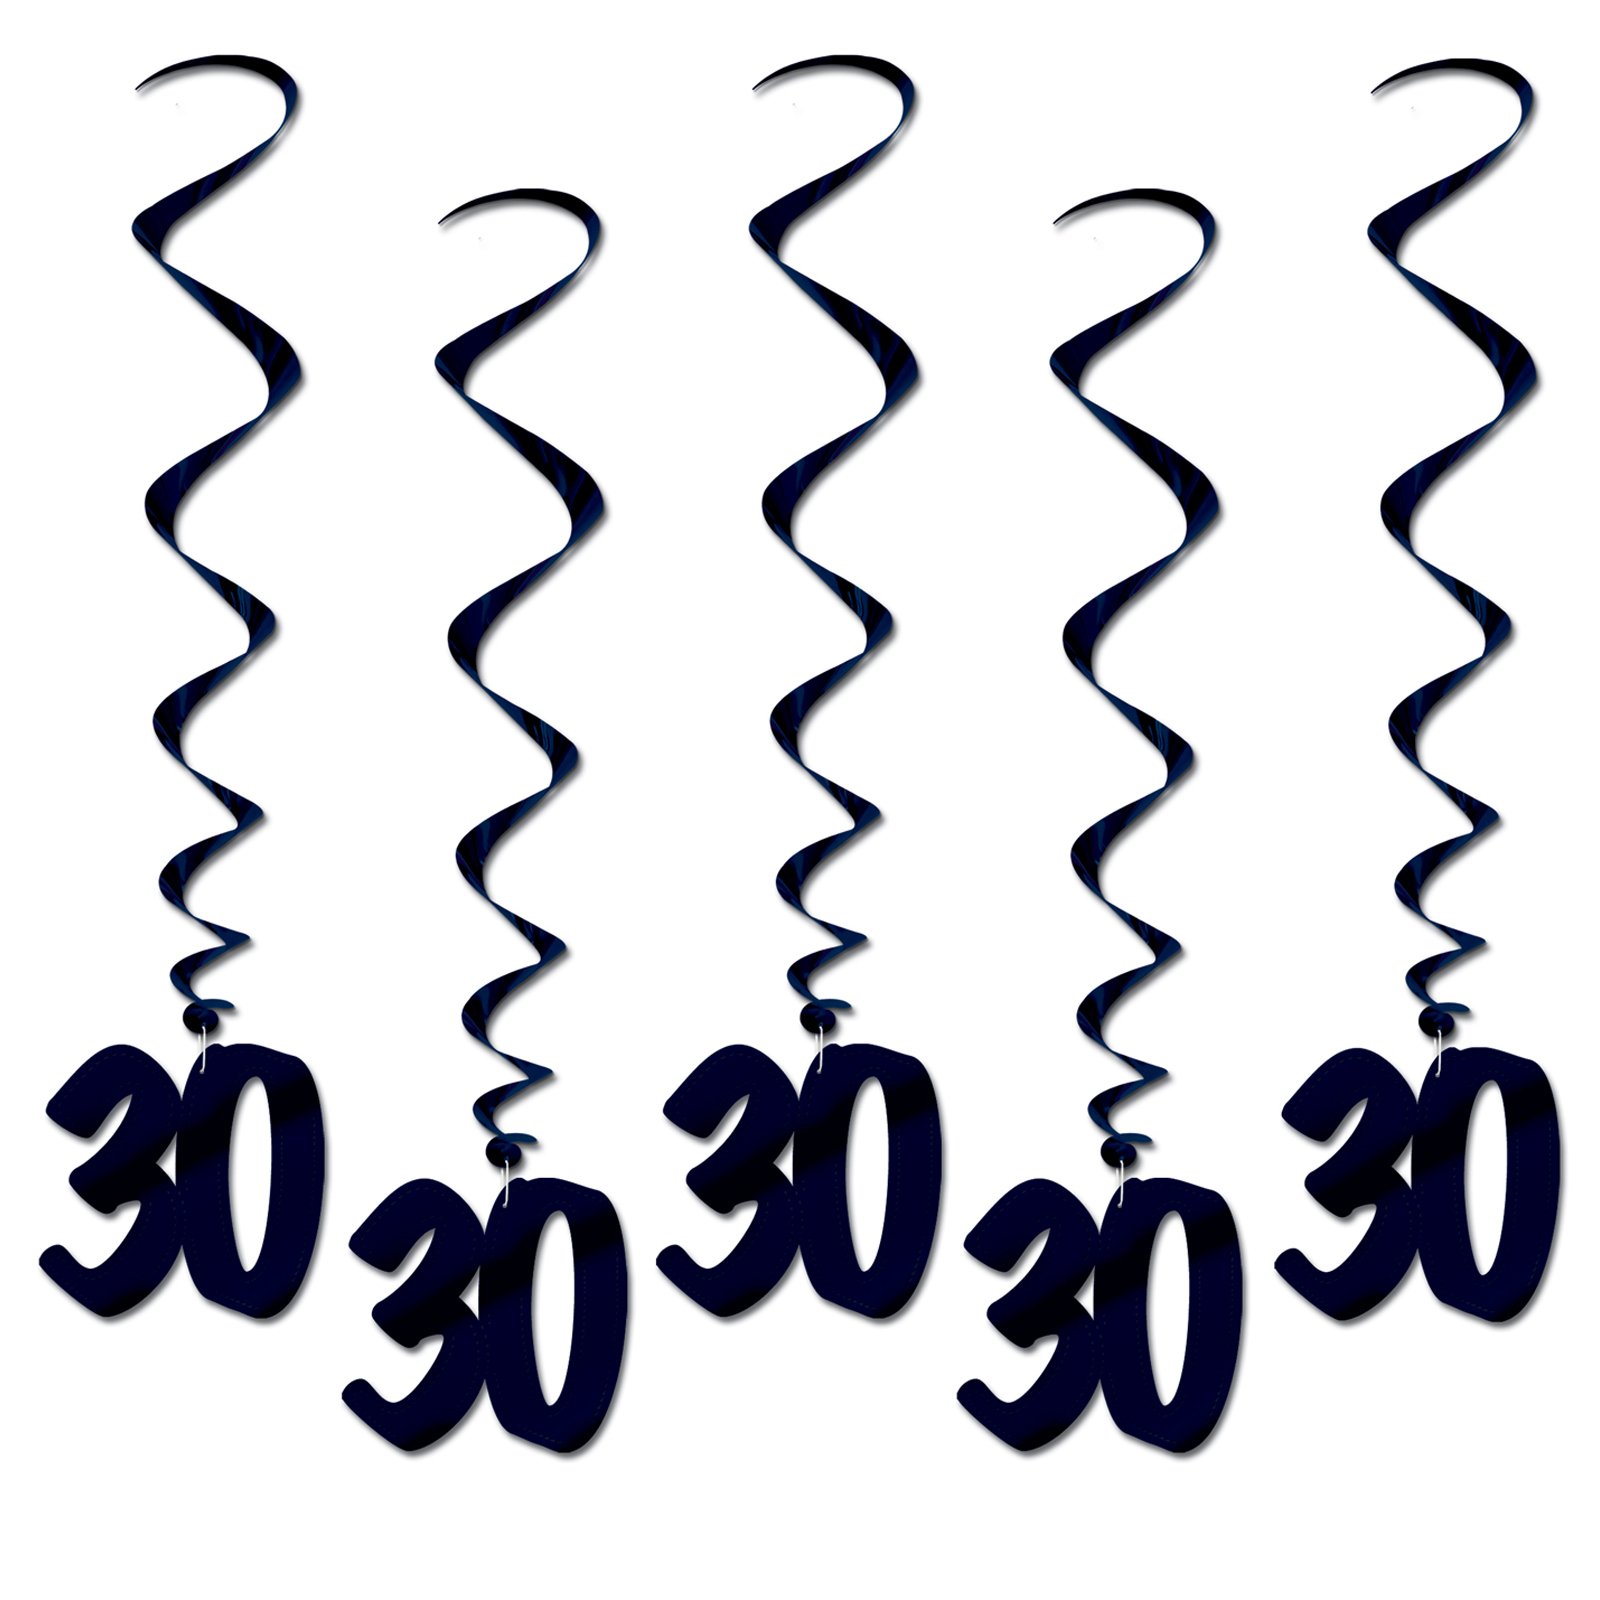 "30" Hanging Whirls (5 count)